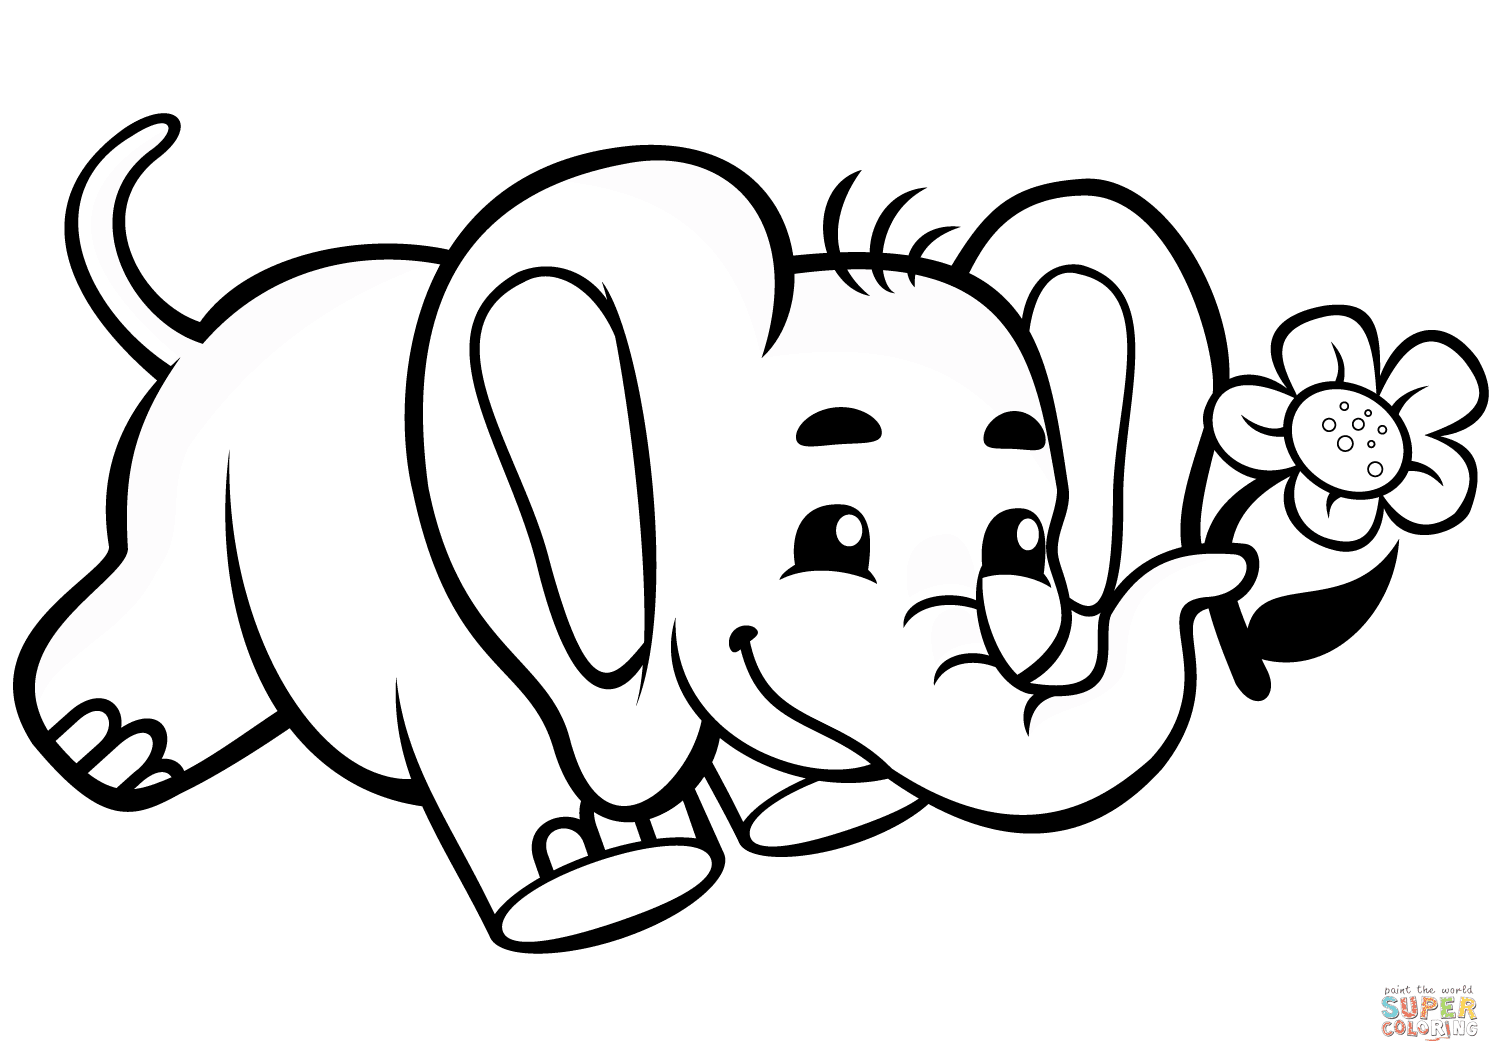 Download 20 Of the Best Ideas for Cute Elephant Coloring Pages ...